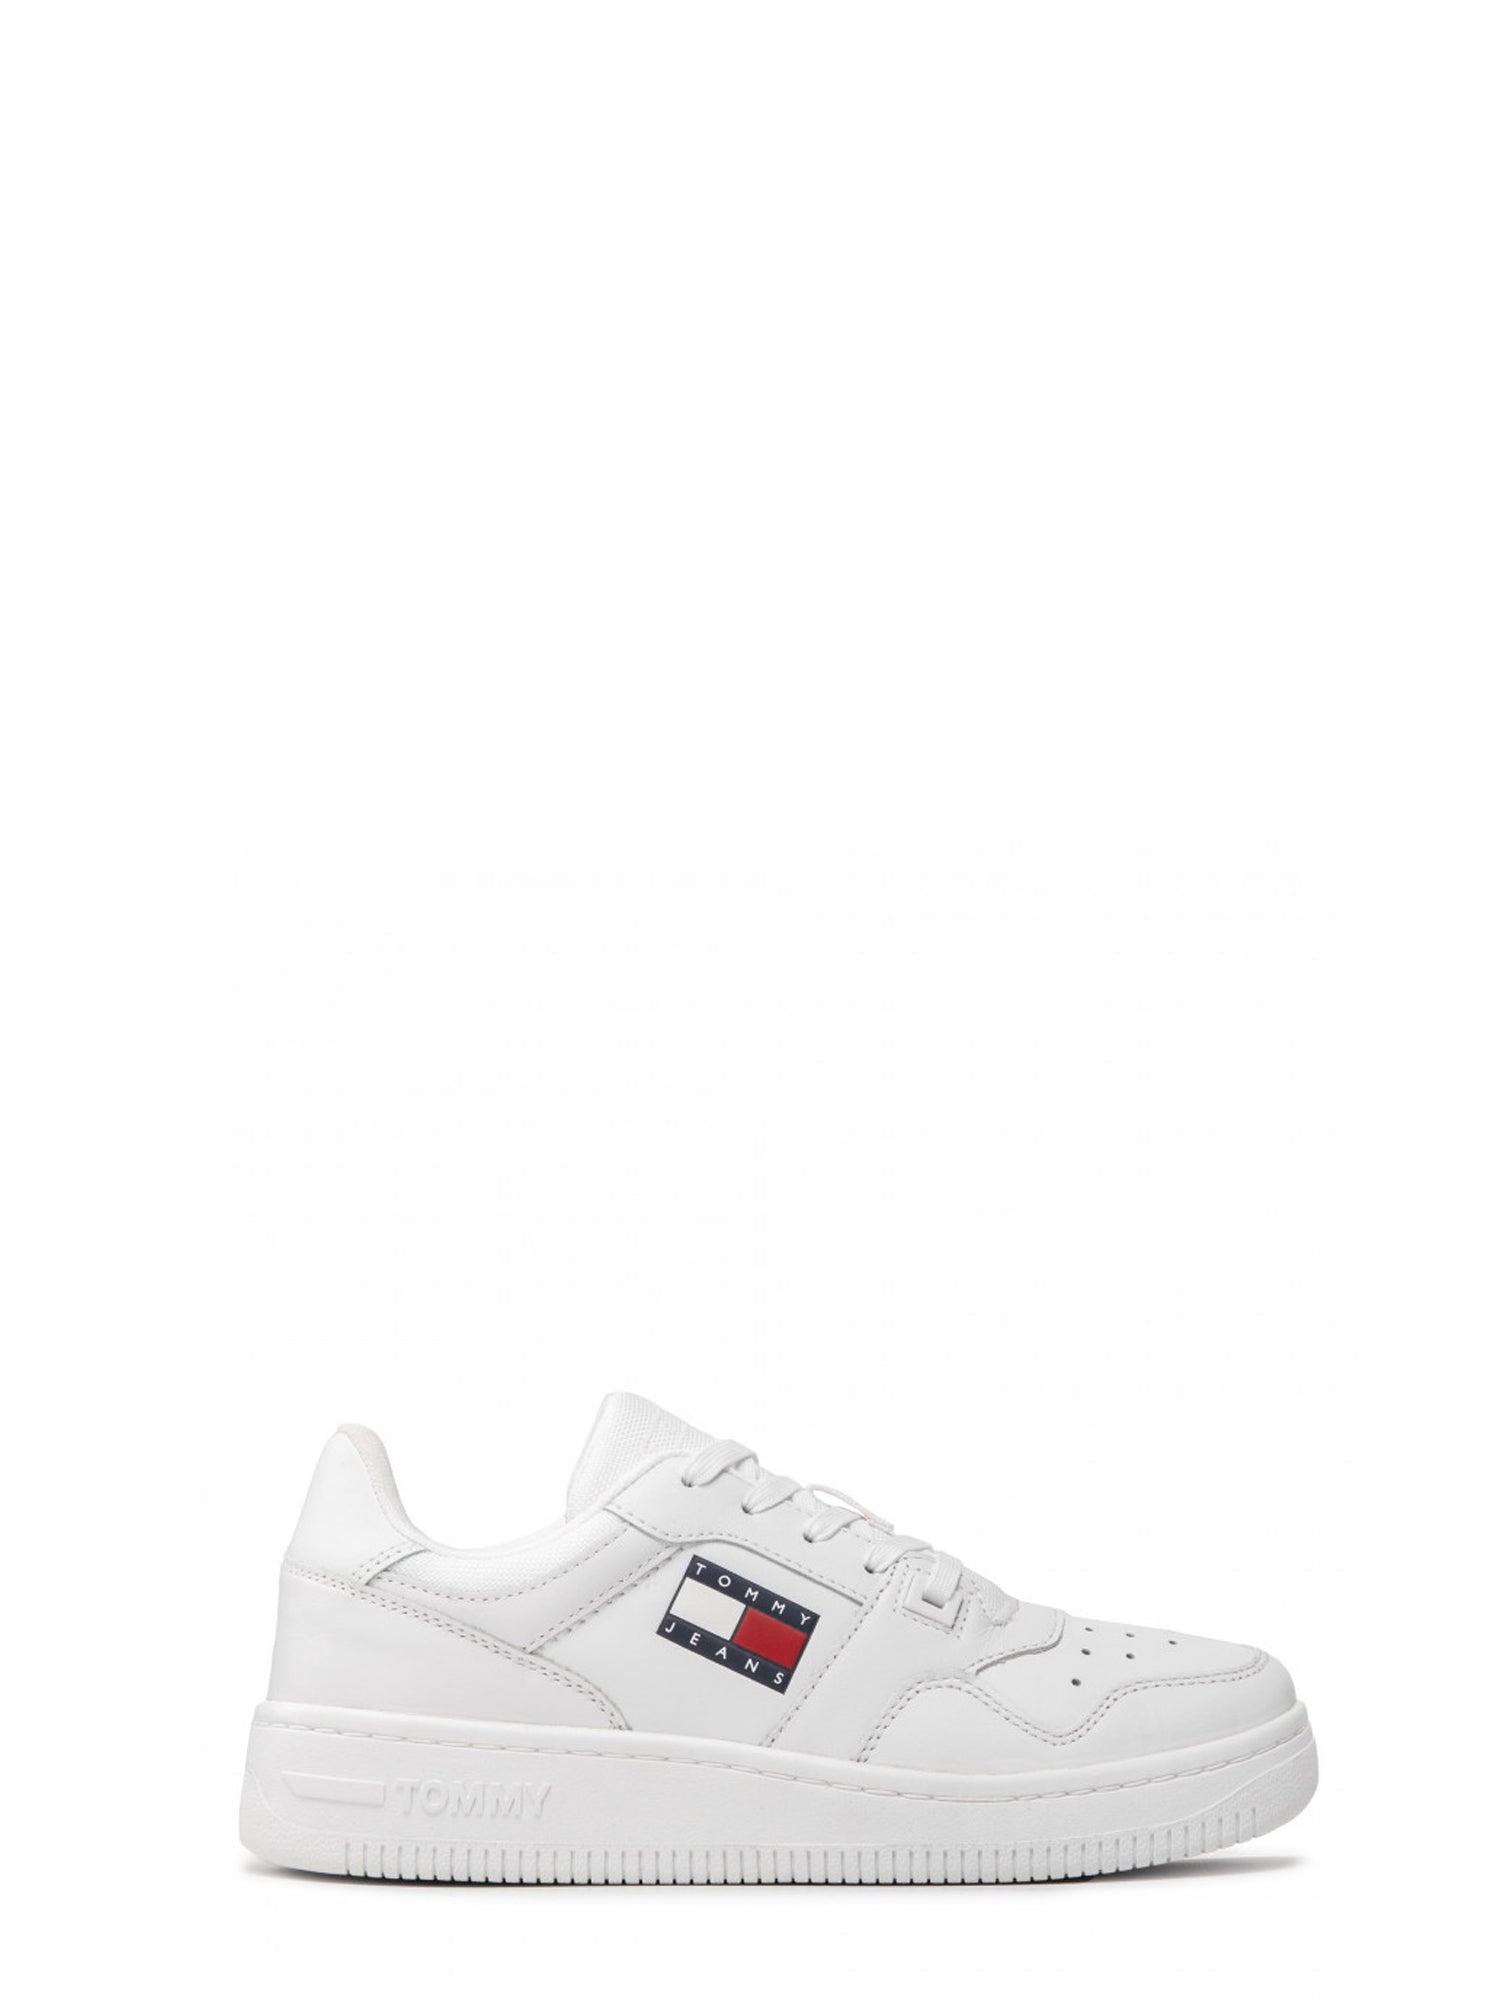 TOMMY HILFIGER SHOES SNEAKERS BASSE ESSENTIAL RÉTRO BIANCO